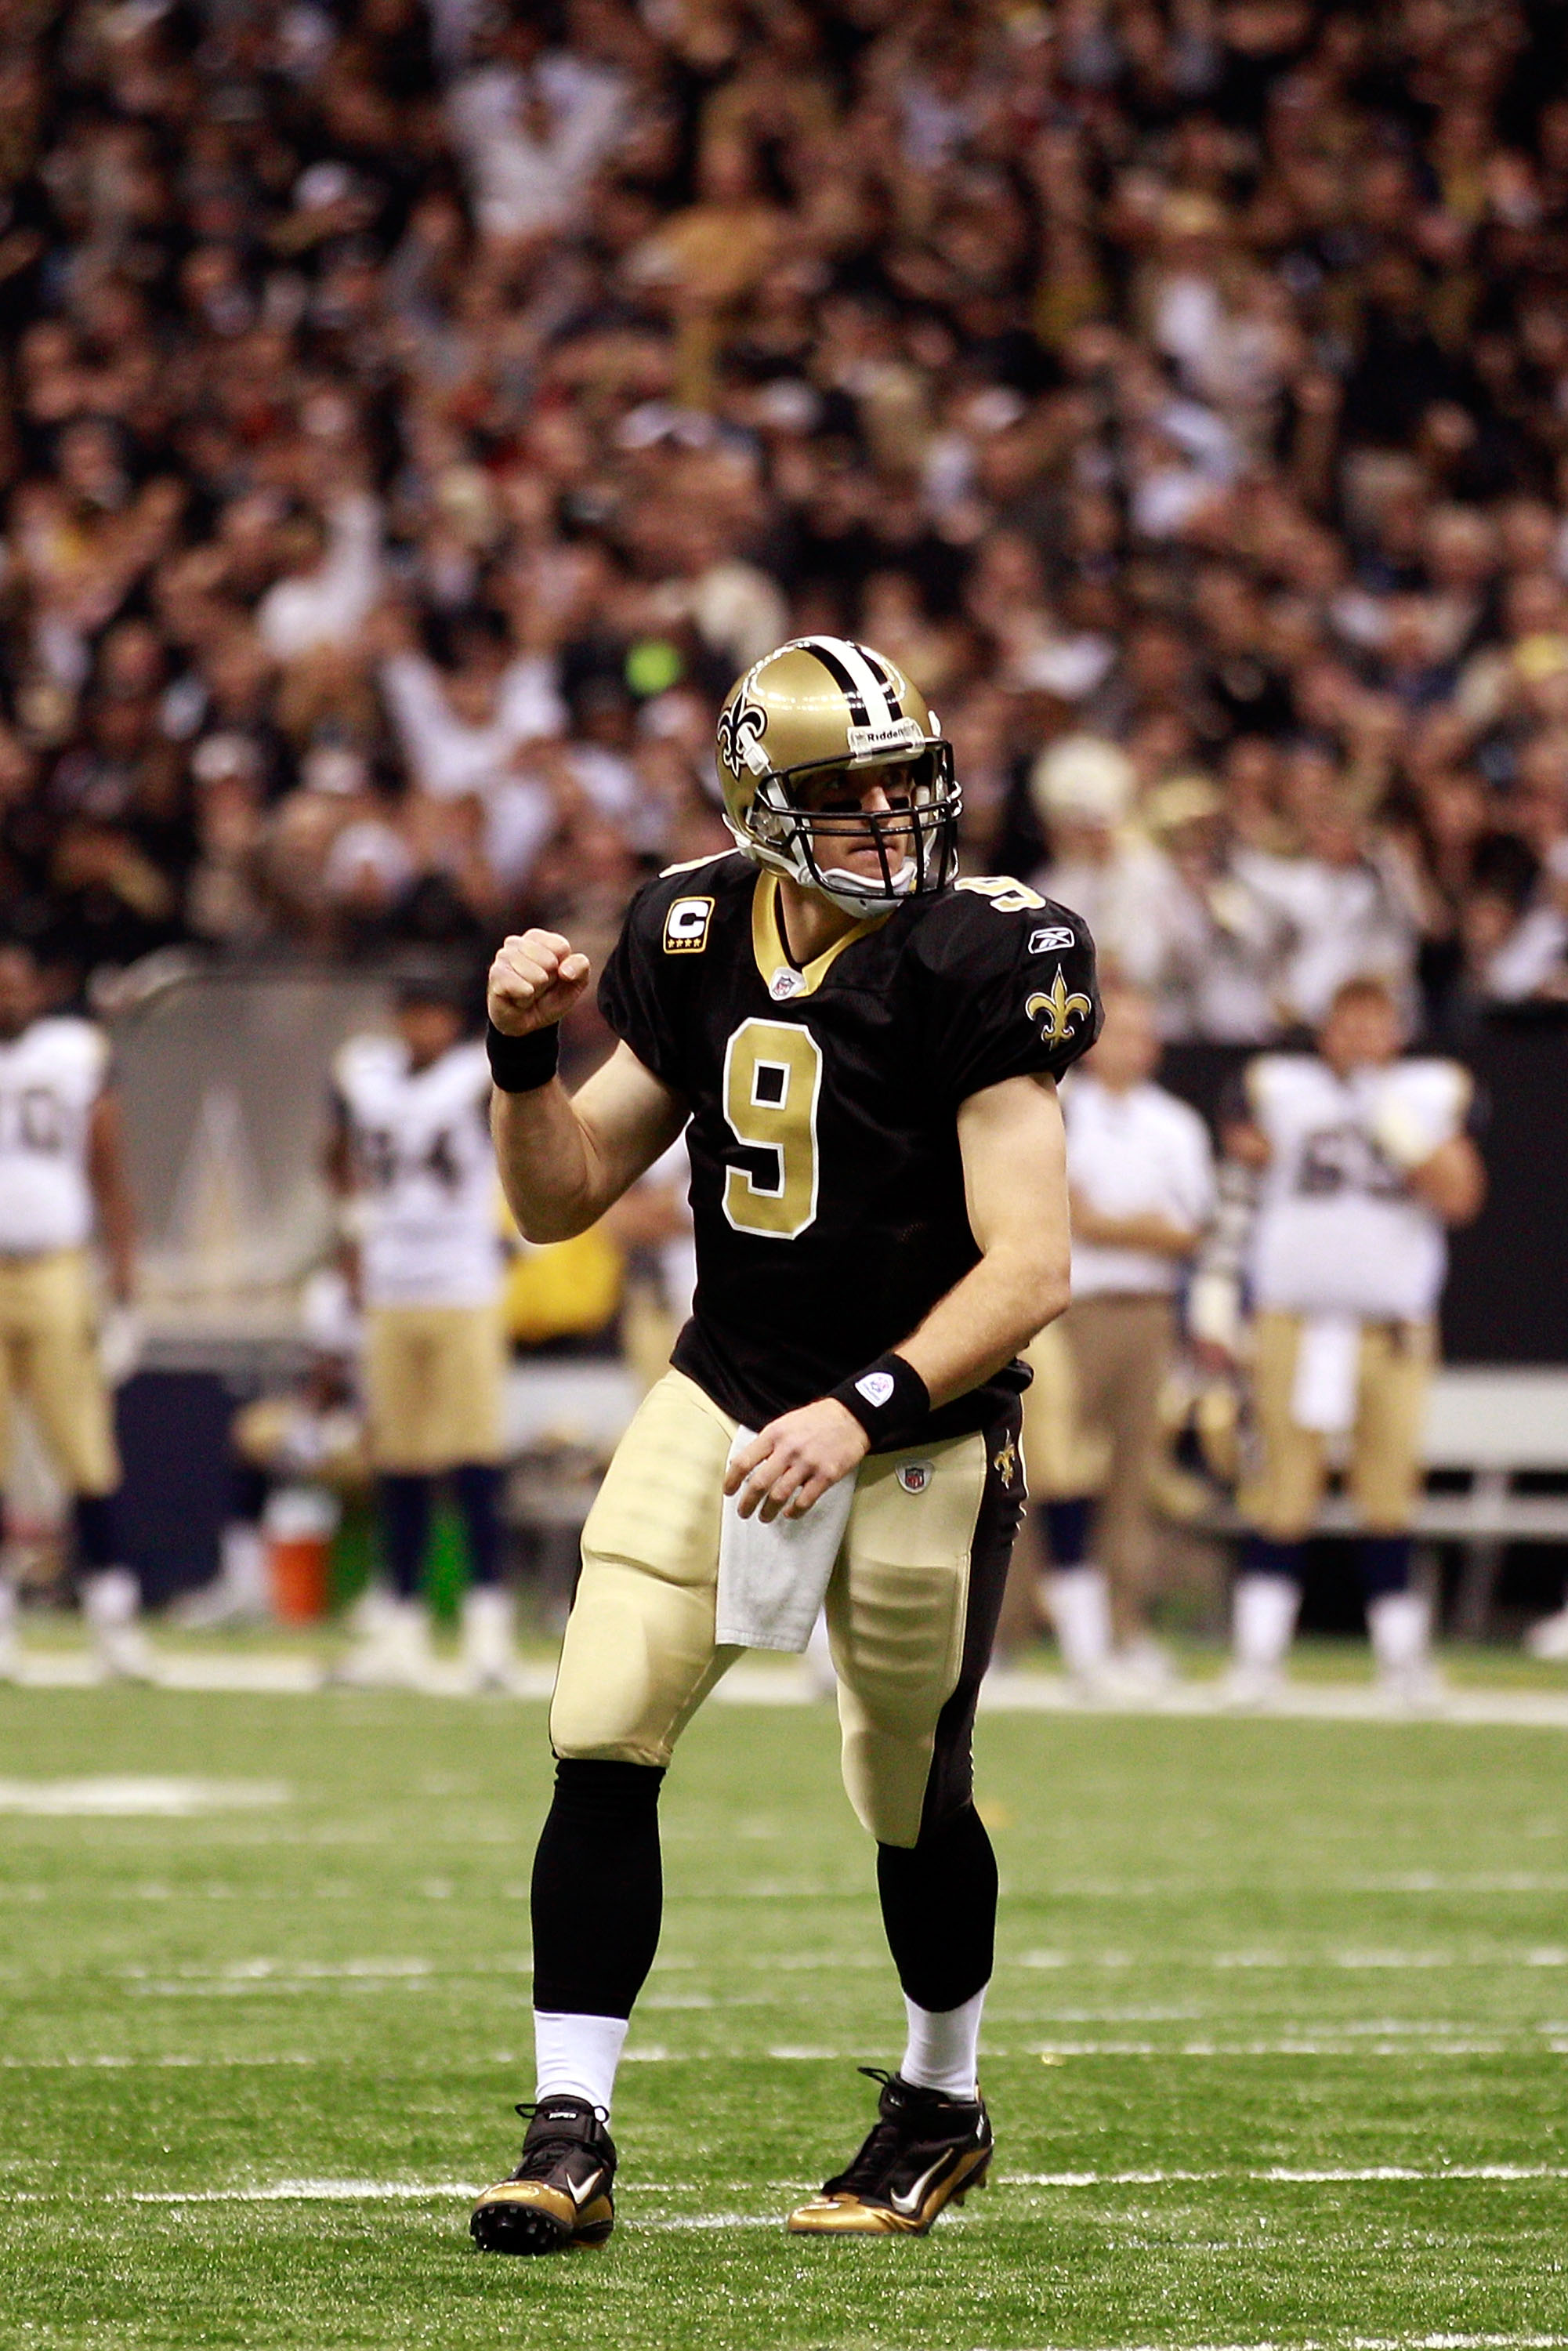 NEW ORLEANS, LA - DECEMBER 12:  Drew Brees #9 of the New Orleans Saints celebrates after scoring a touchdown against the St. Louis Rams at the Louisiana Superdome on December 12, 2010 in New Orleans, Louisiana. The Saints defeated the Rams 31-13.  (Photo